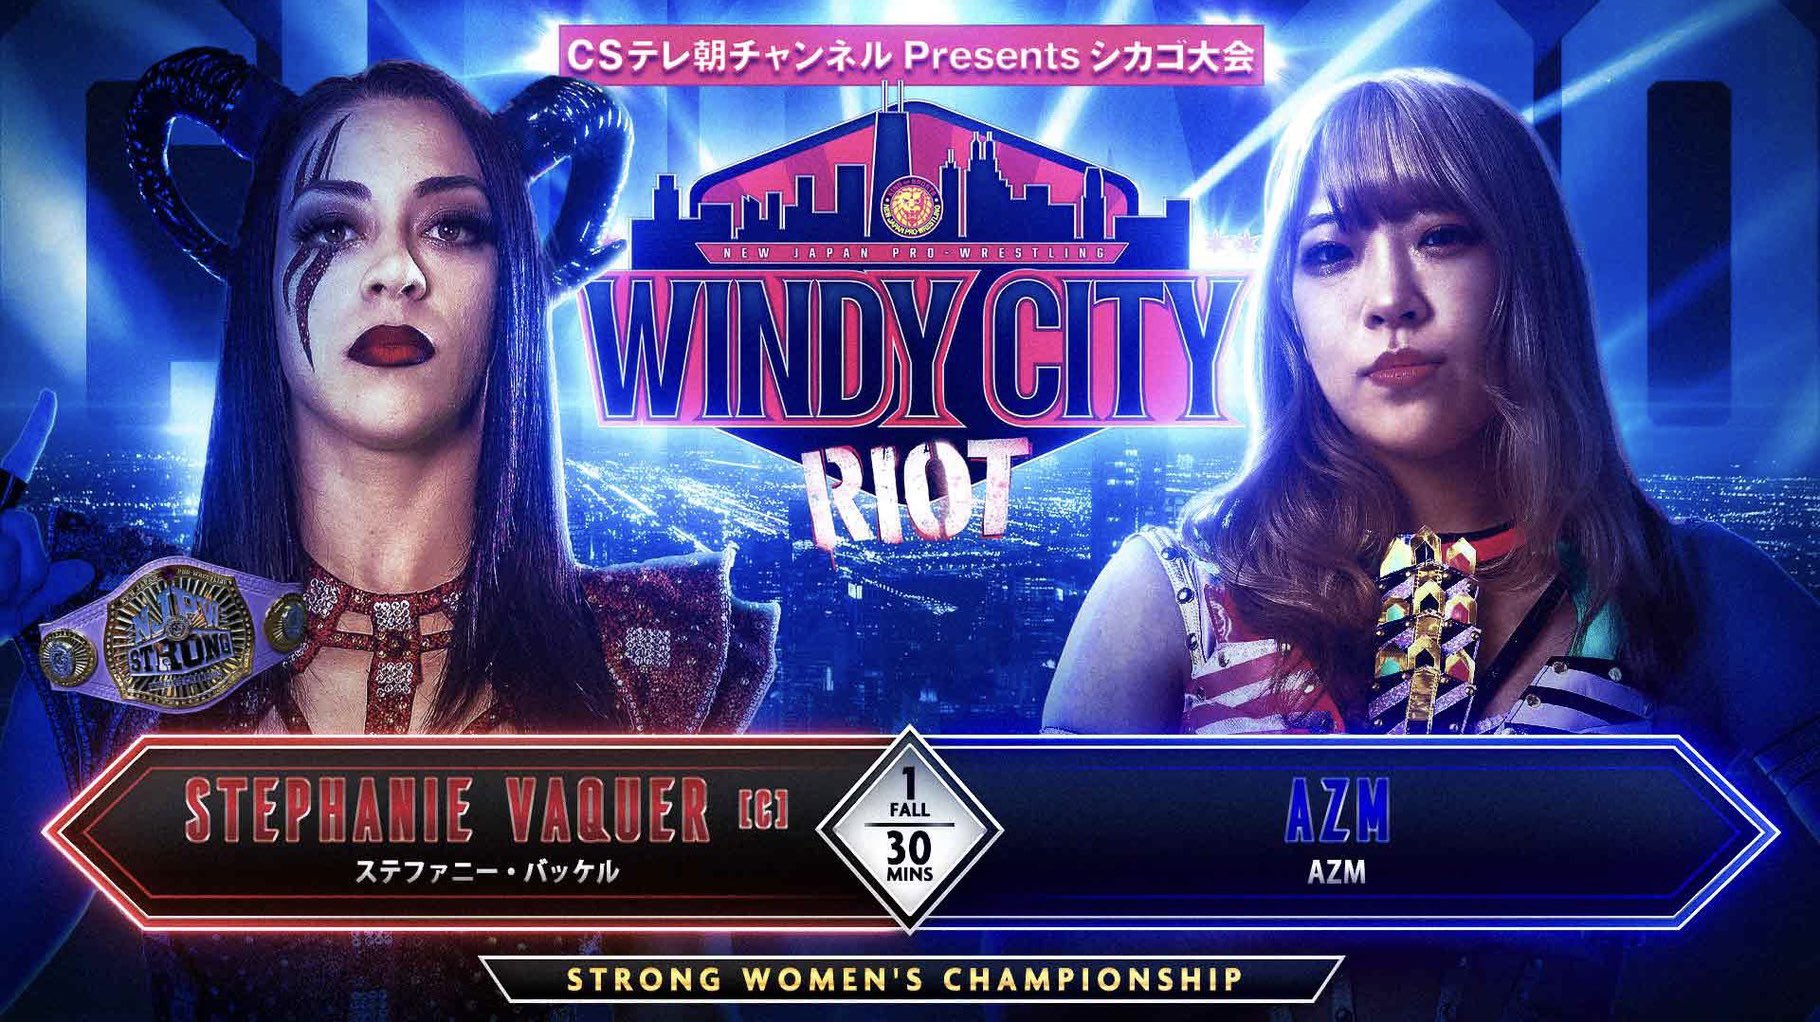 Stephanie Vaquer vs. AZM Set For NJPW STRONG Women’s Title